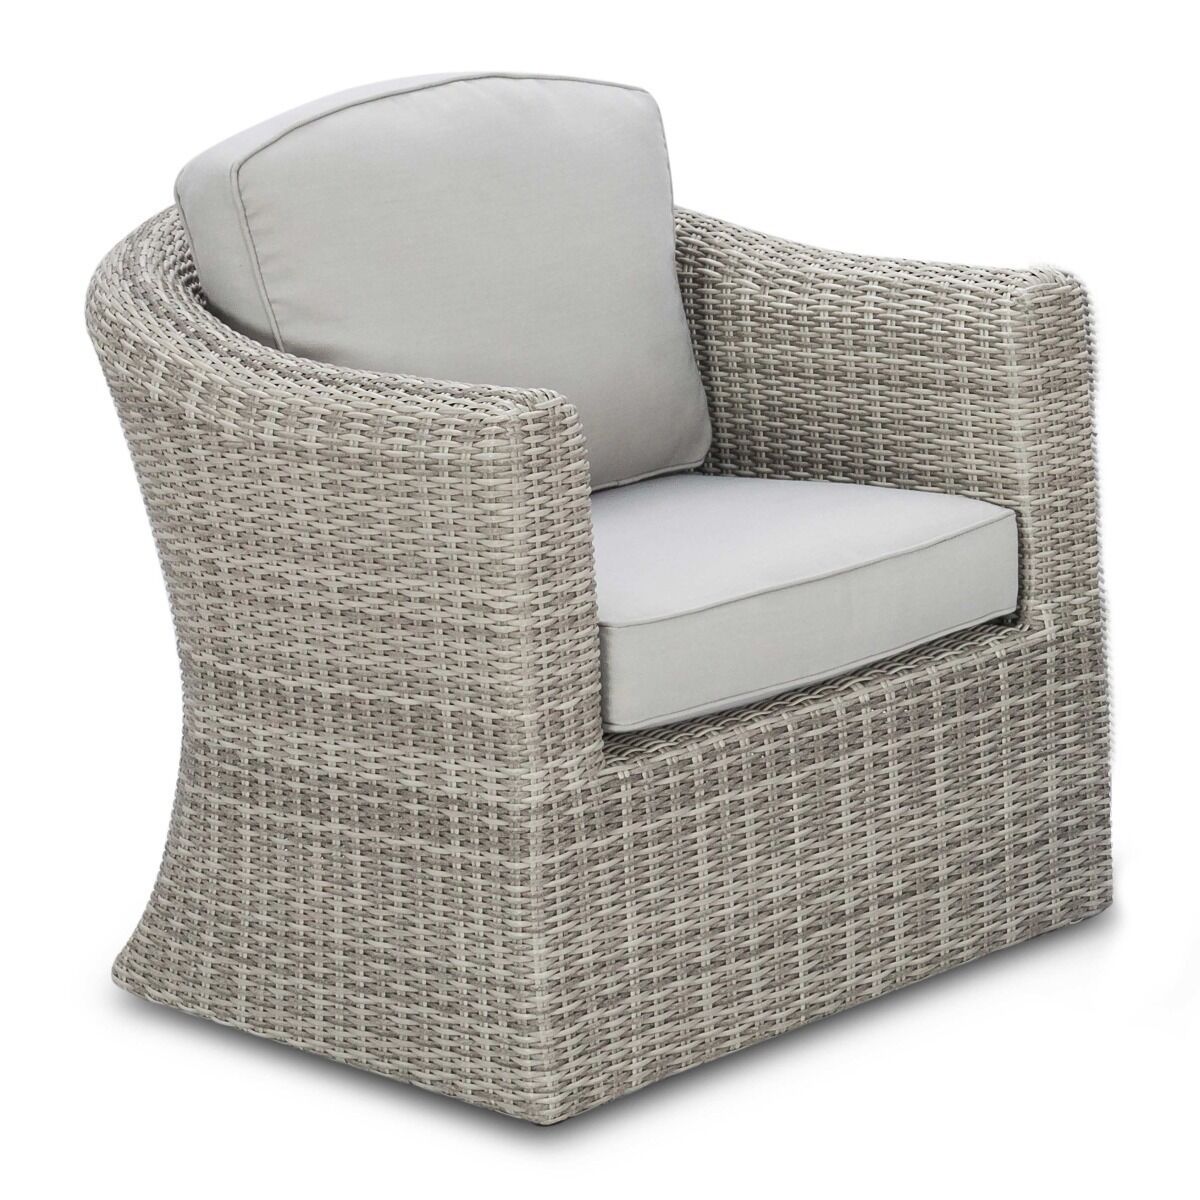 Maze - Oxford Small Rattan Corner Group with Armchair product image